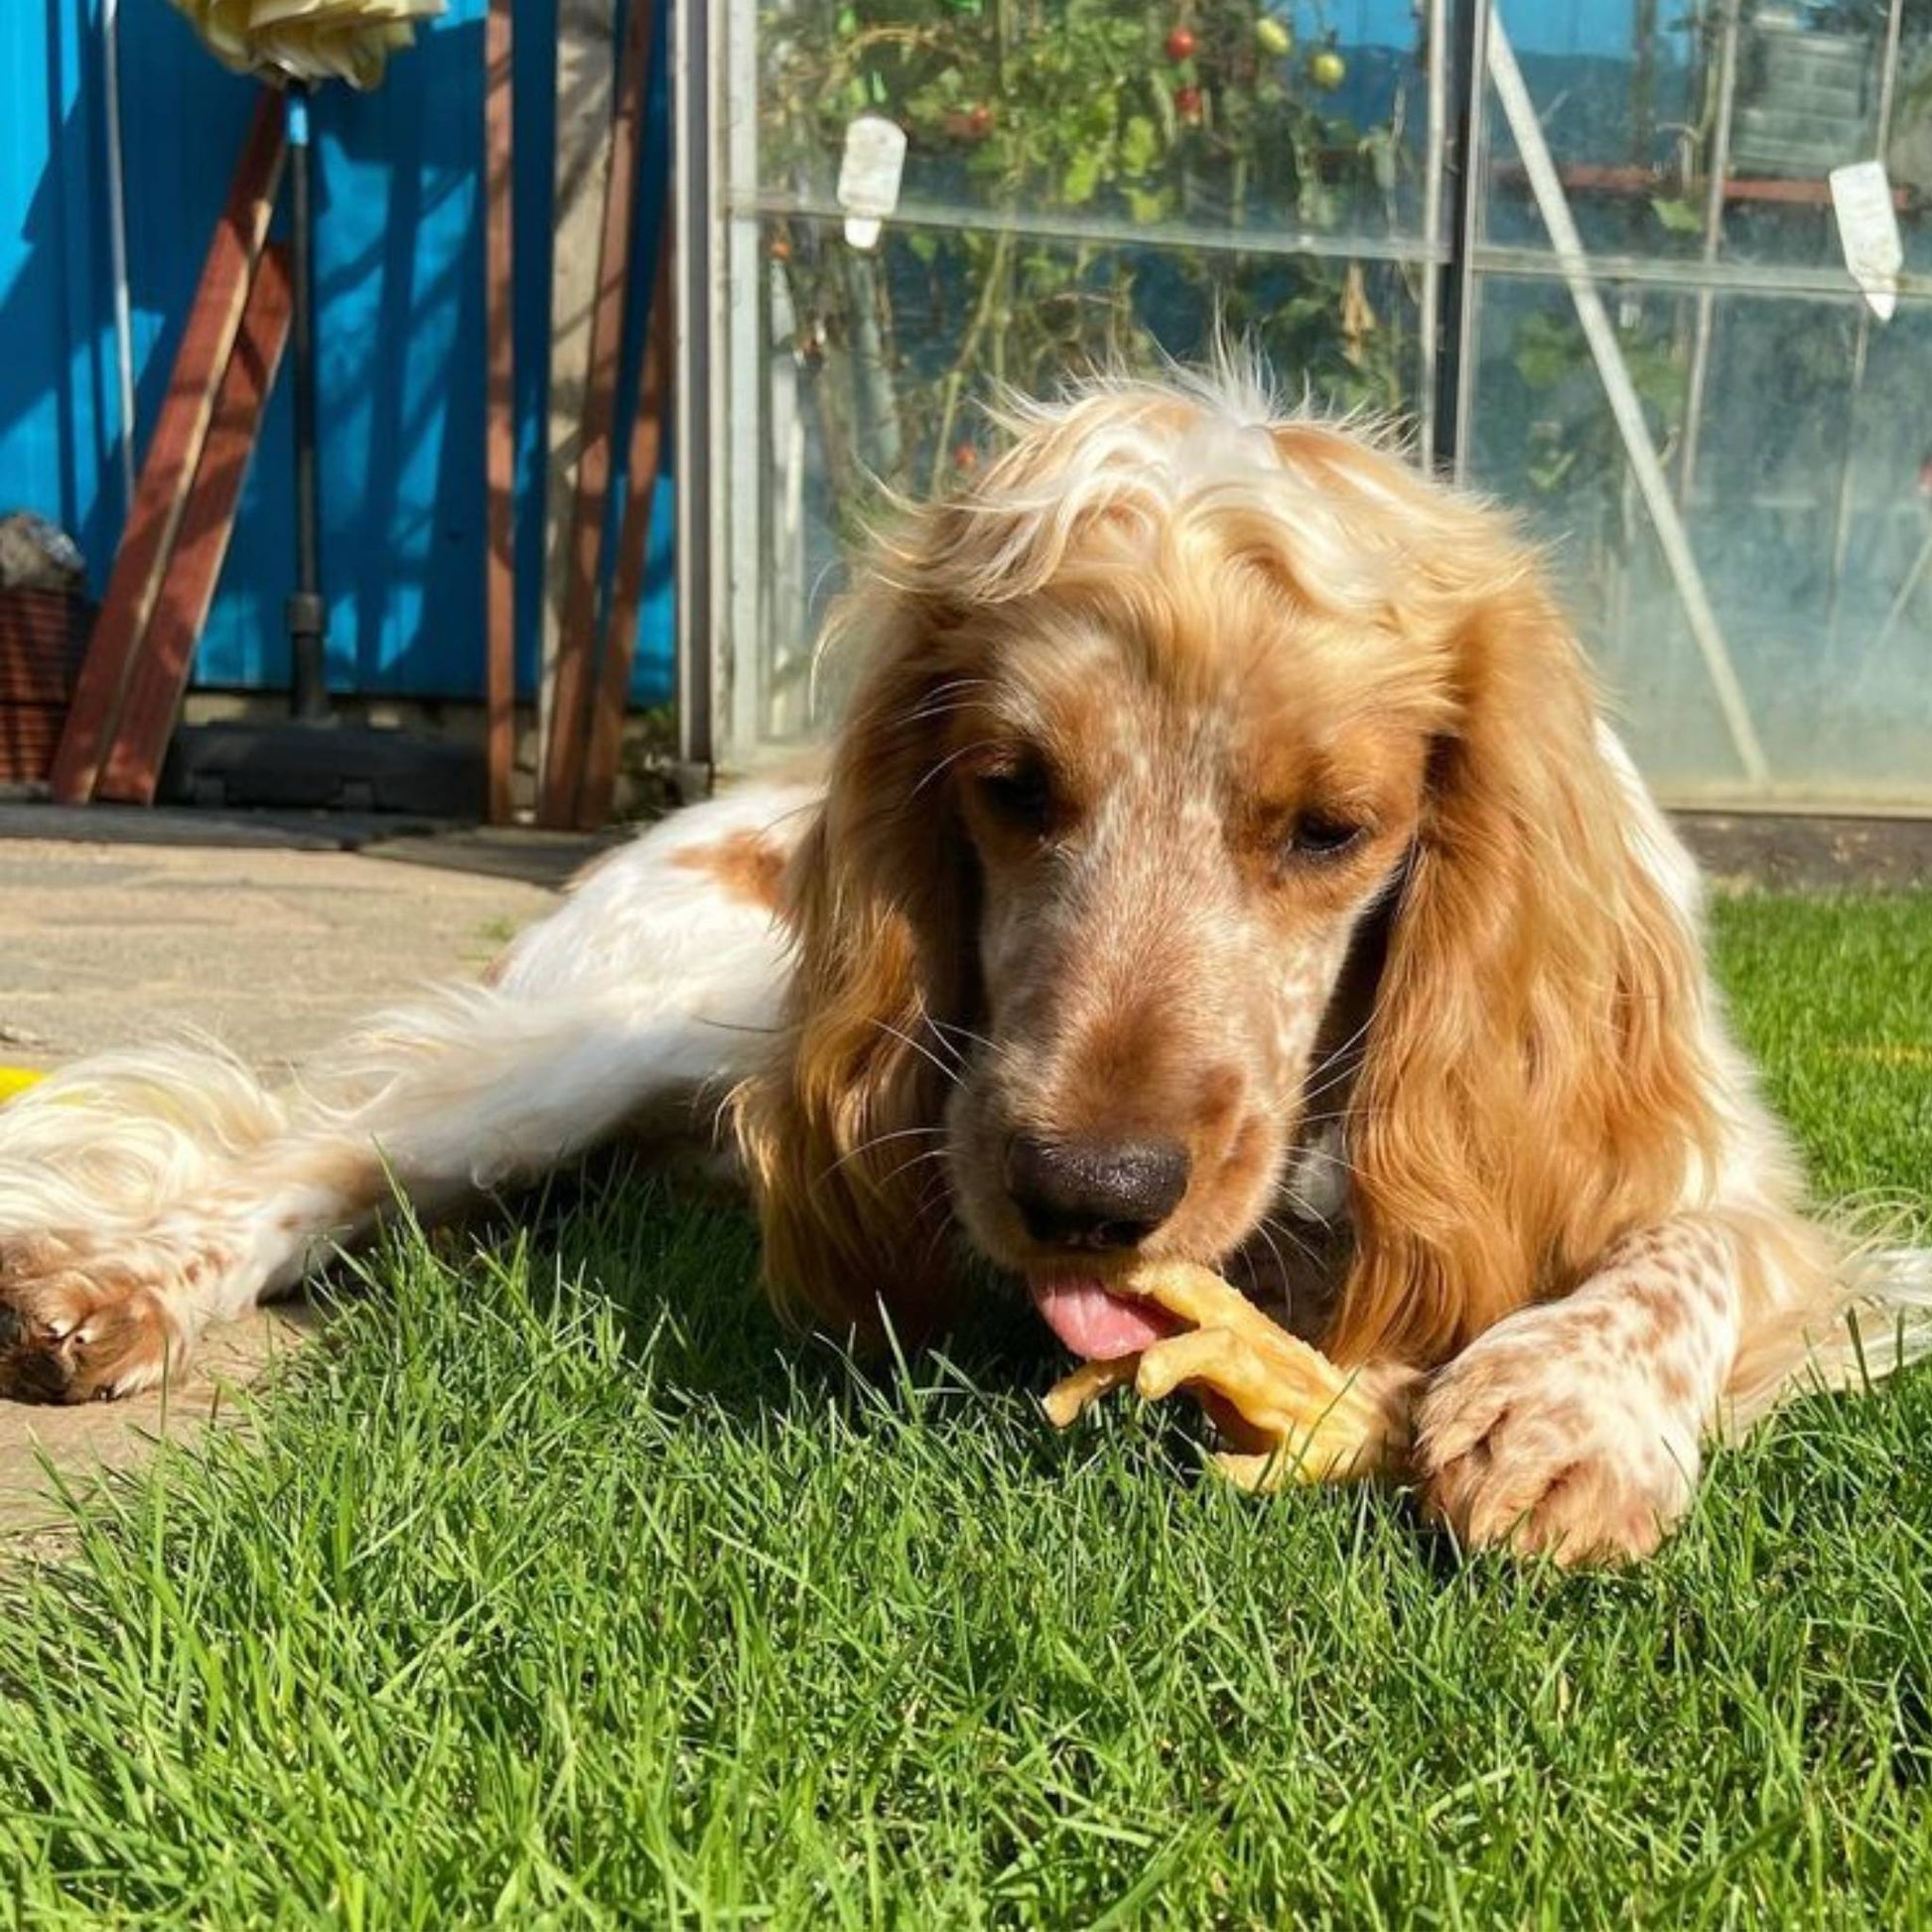 Spaniel eating a chicken foot dog chew